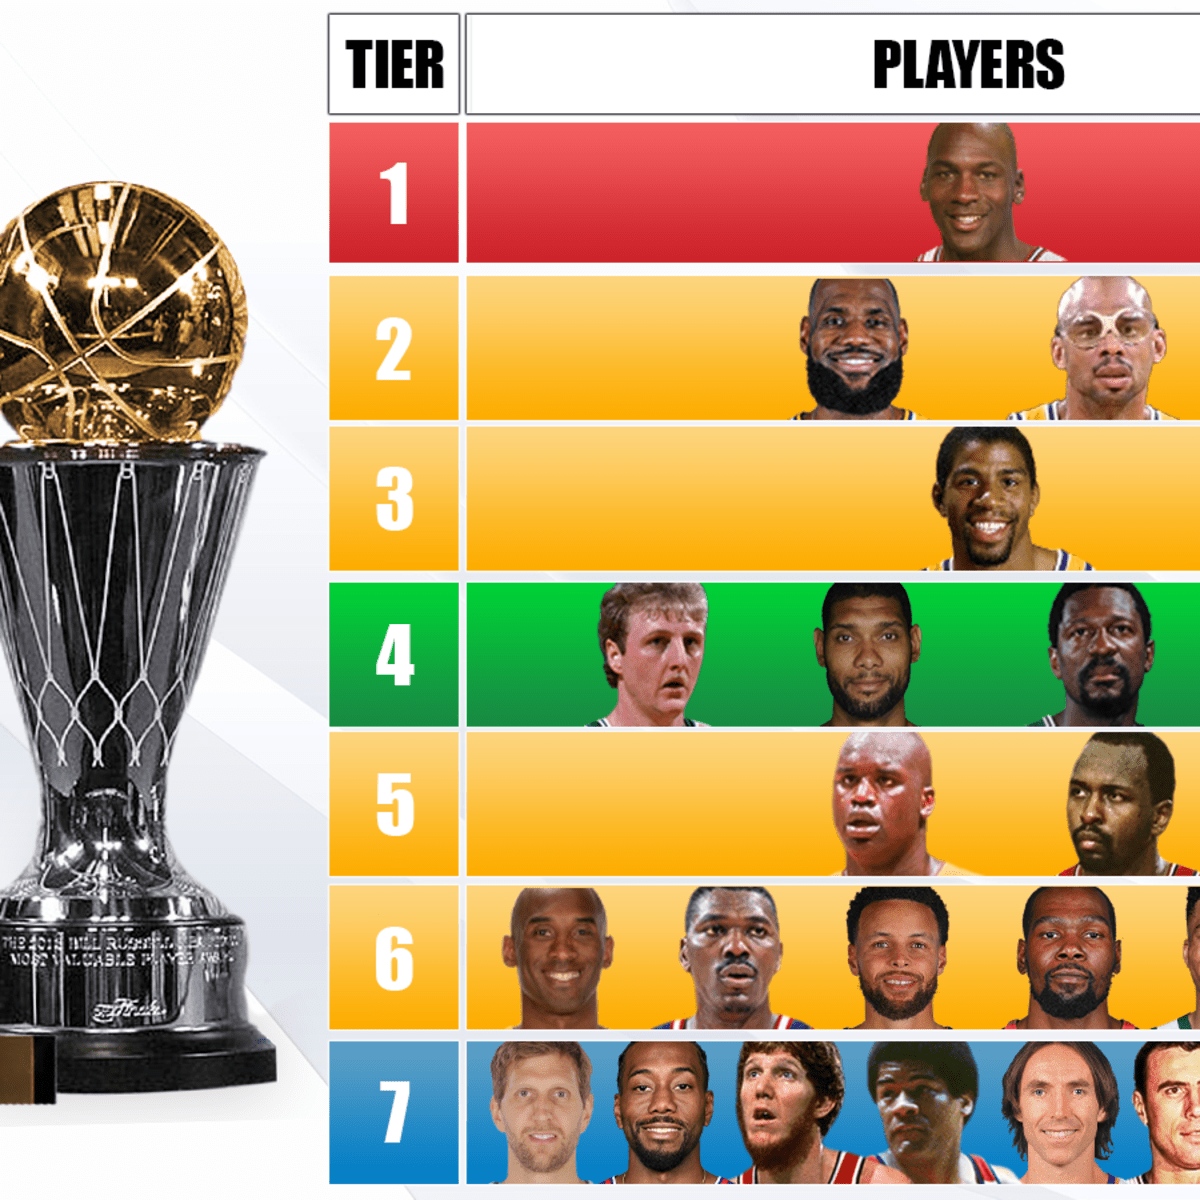 Ranking The NBA Players With The Most MVP Awards And Finals MVP